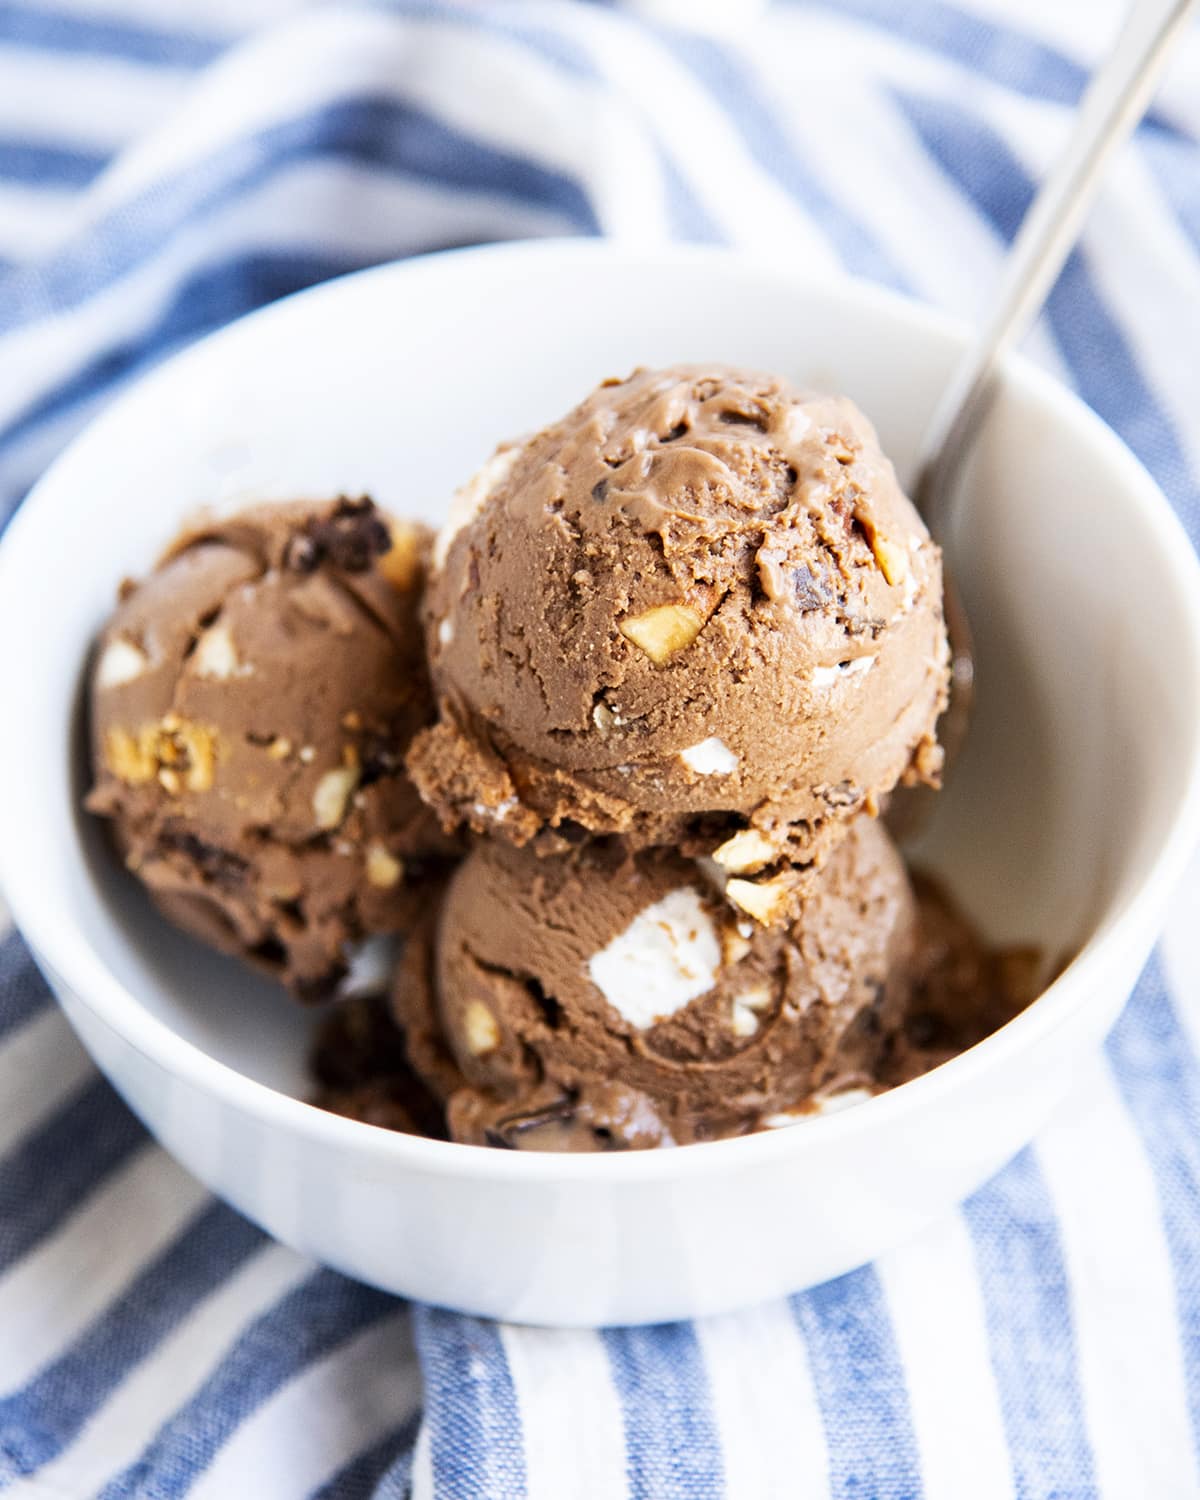 A bowl full of three scoops of chocolate rocky road ice cream.